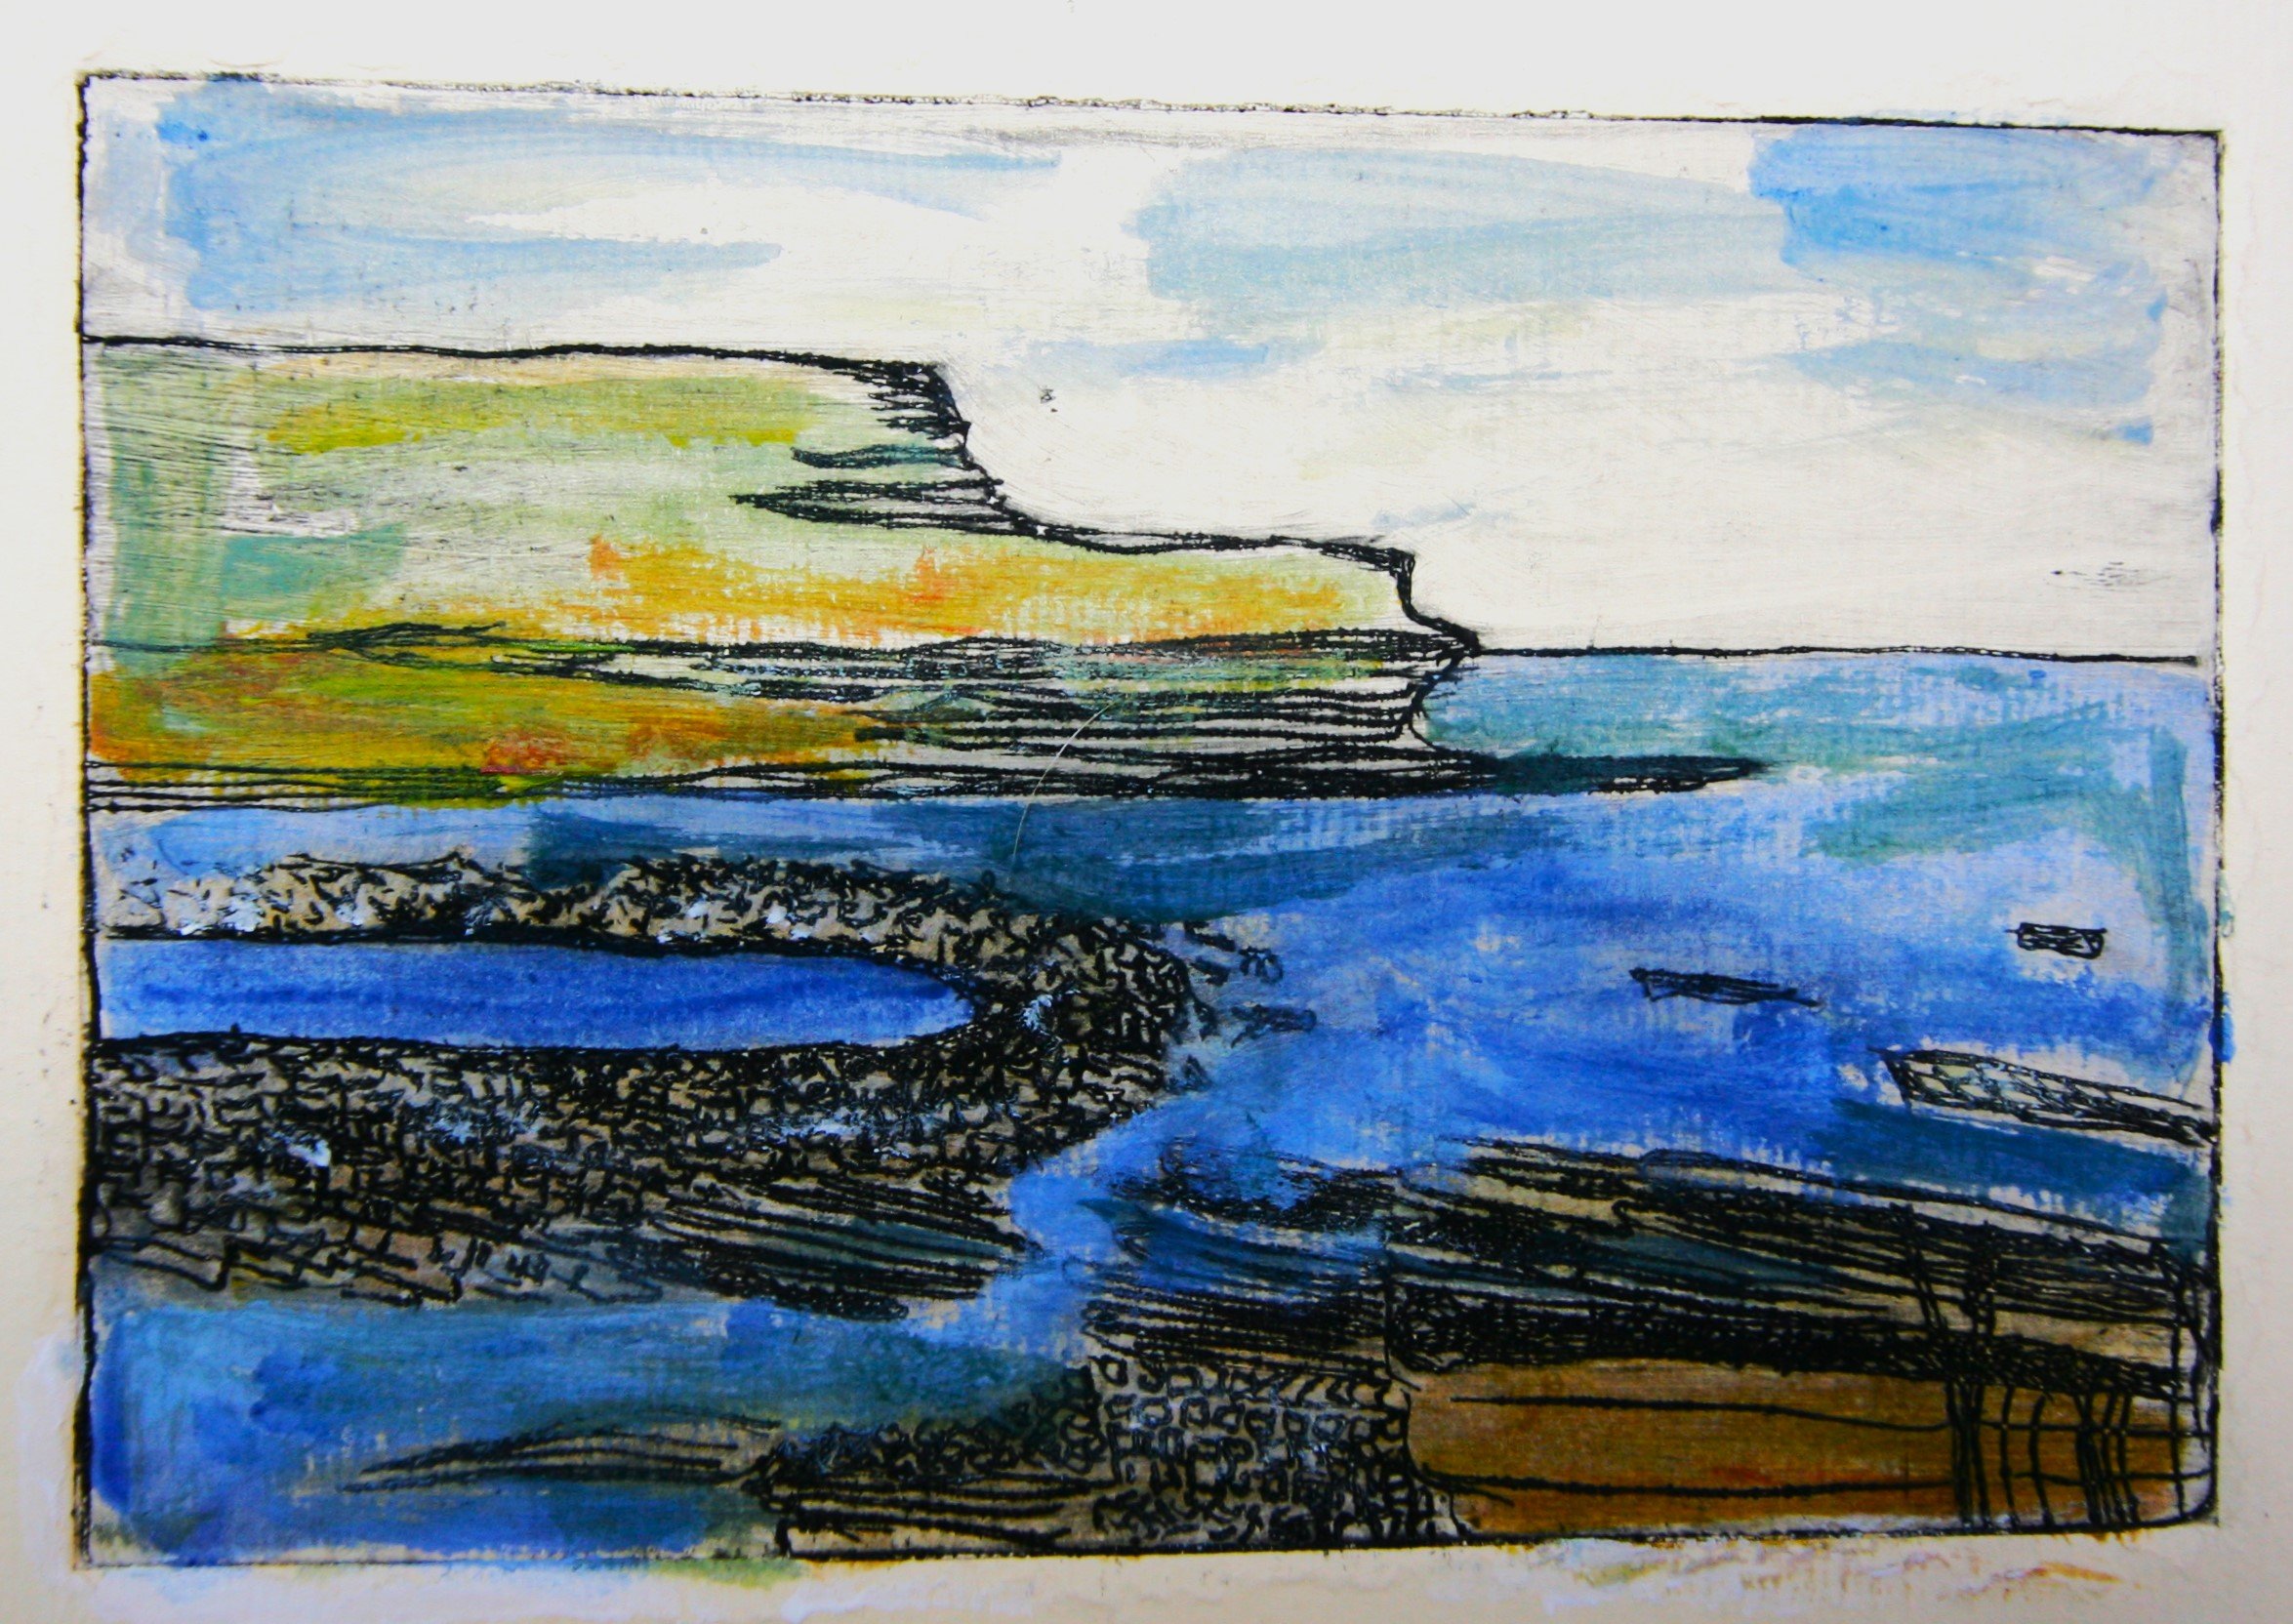 "Marwick Heat, Orkney Islands" by Susana Youngsteadt